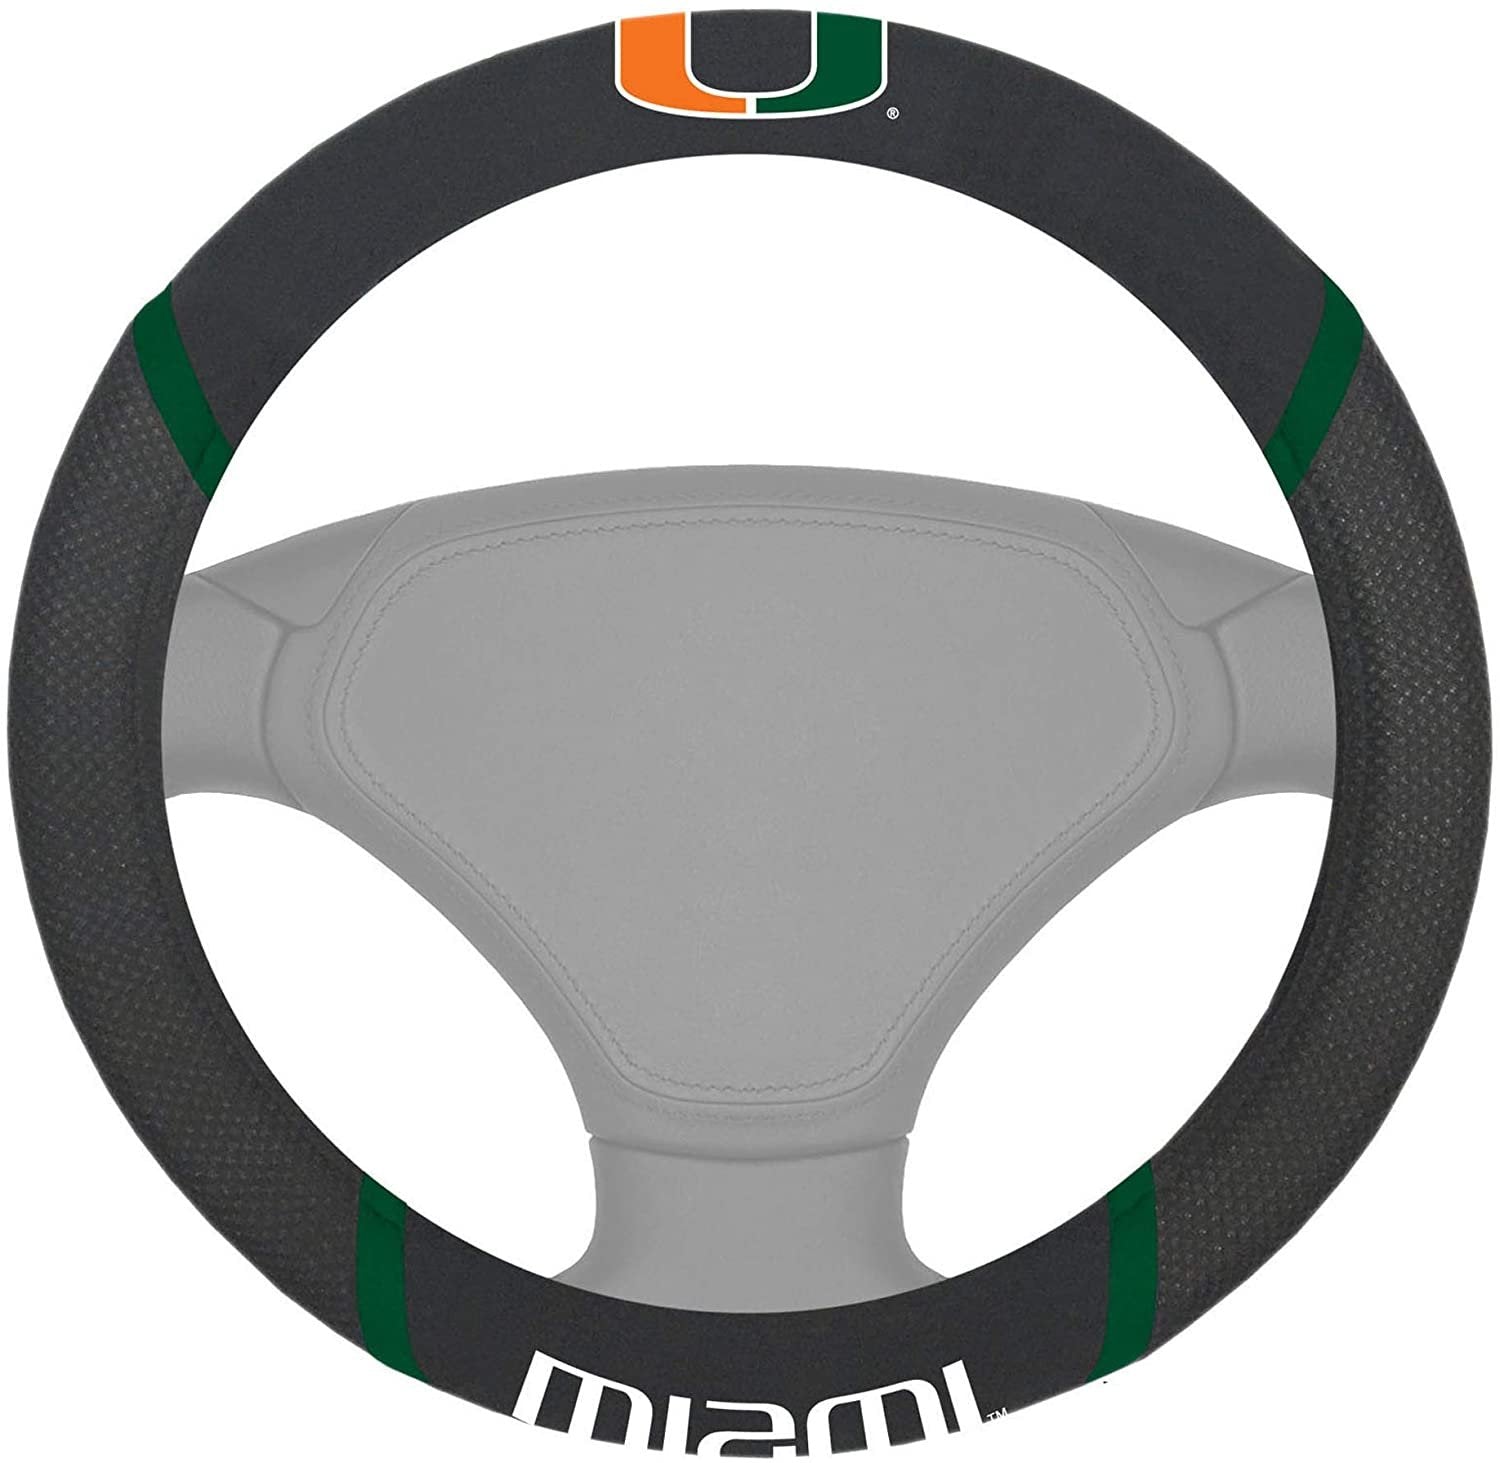 Miami Hurricanes Steering Wheel Cover Embroidered Black 15 Inch University of